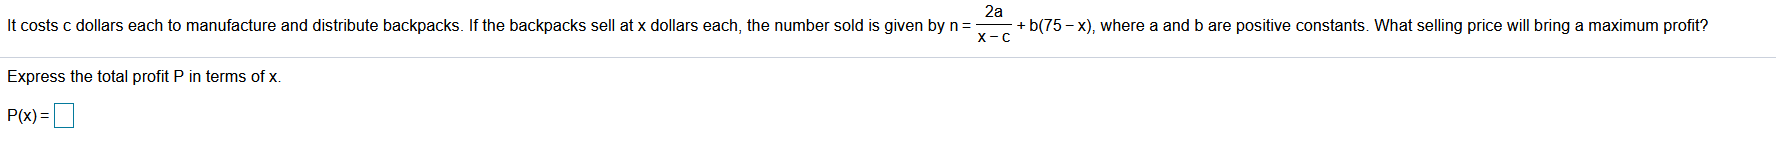 It costs c dollars each to manufacture and distribute backpacks. If the backpacks sell at x dollars each, the number sold is given by n =
+ b(75 – x), where a and b are positive constants. What selling price will bring a maximum profit?
X-C
